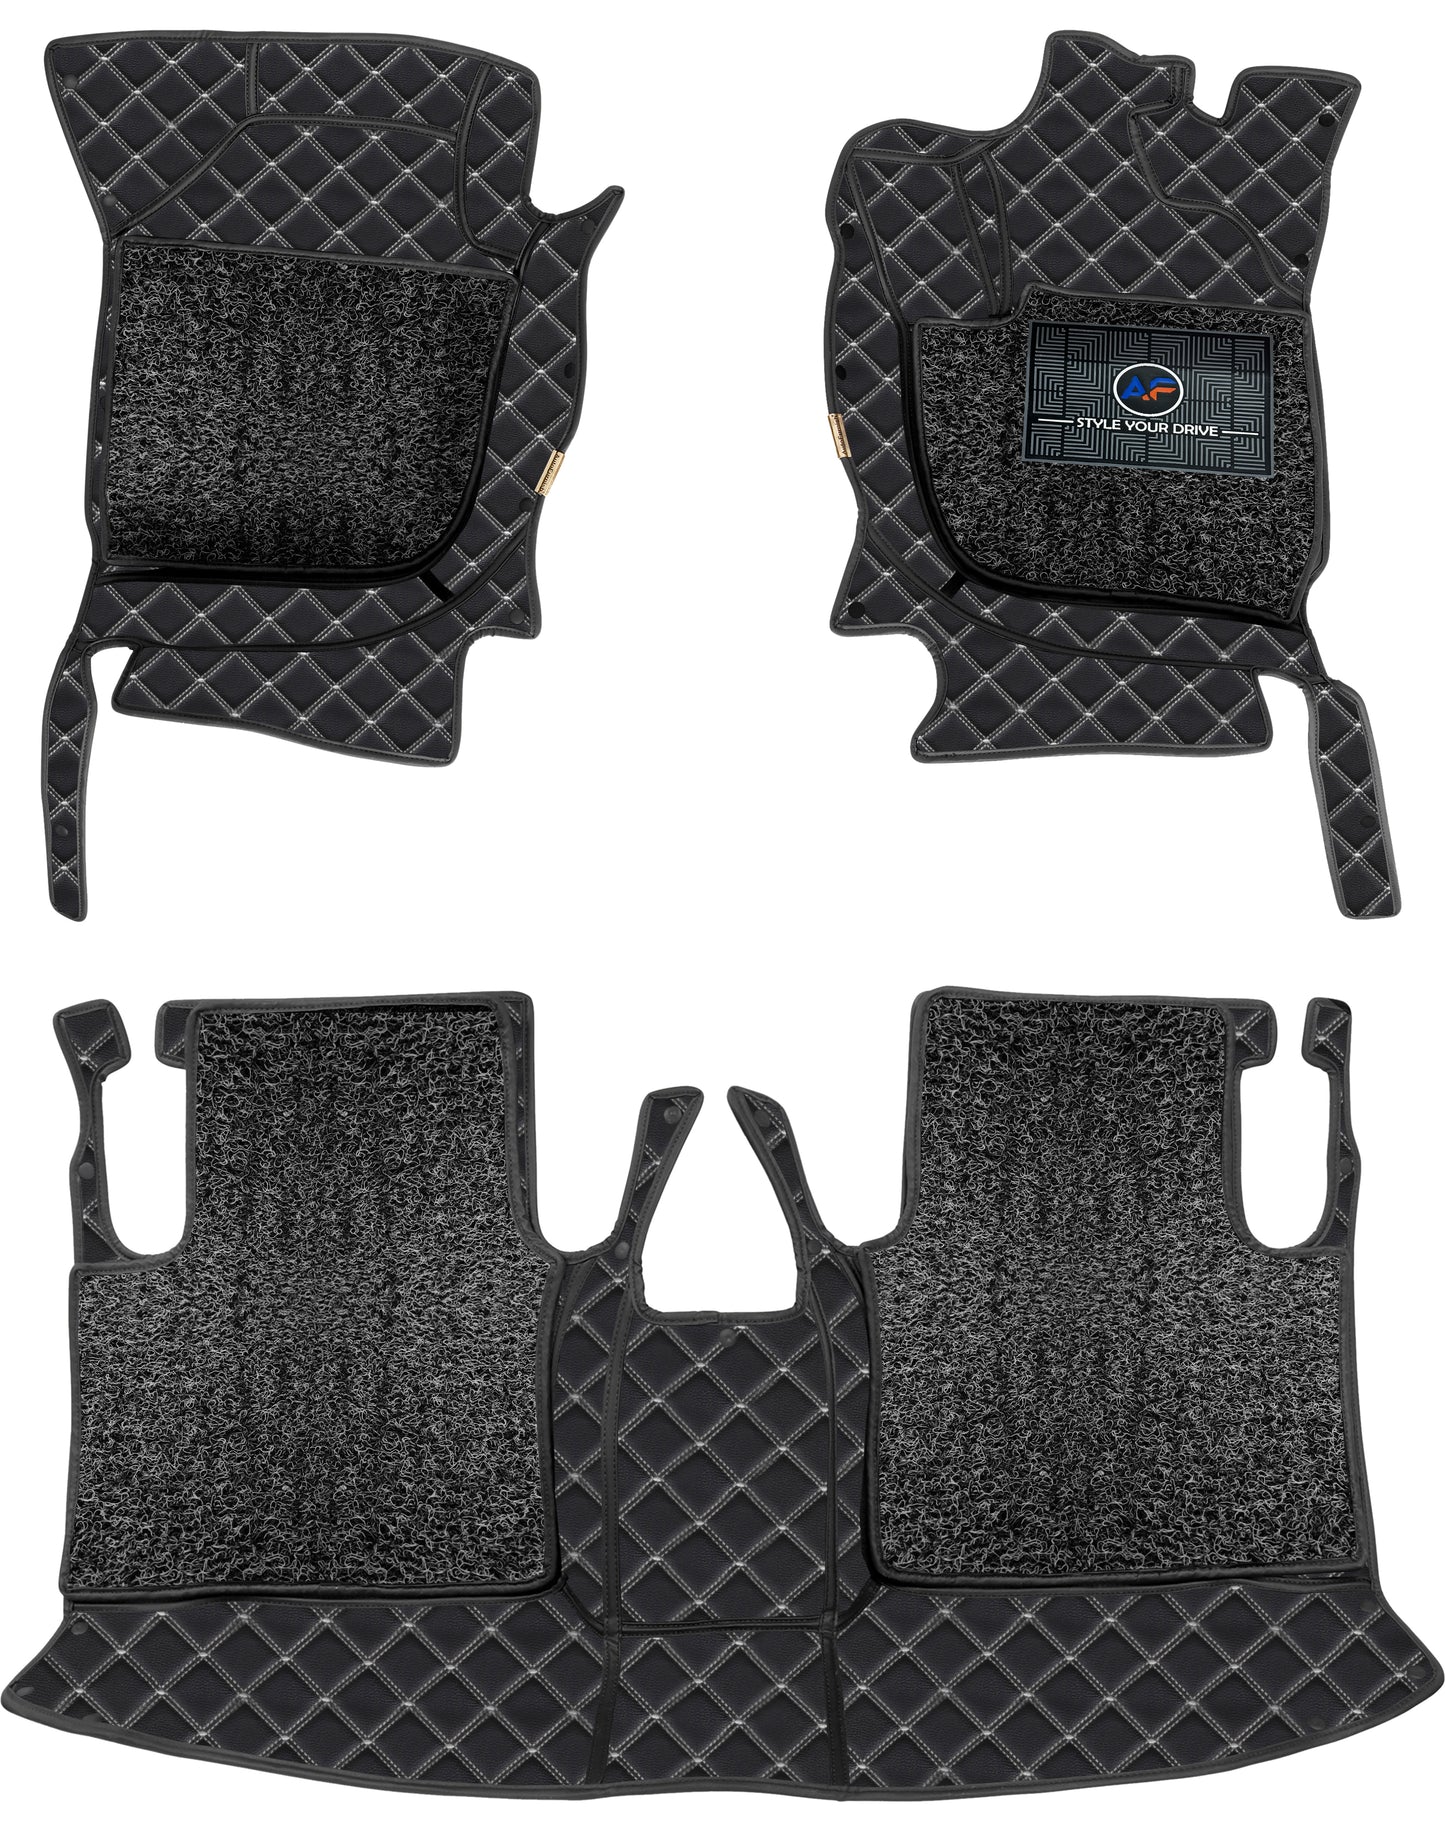 Land Rover Defender 2020 7D Luxury Car Mat, All Weather Proof, Anti-Skid, 100% Waterproof & Odorless with Unique Diamond Fish Design (24mm Luxury PU Leather, 2 Rows)